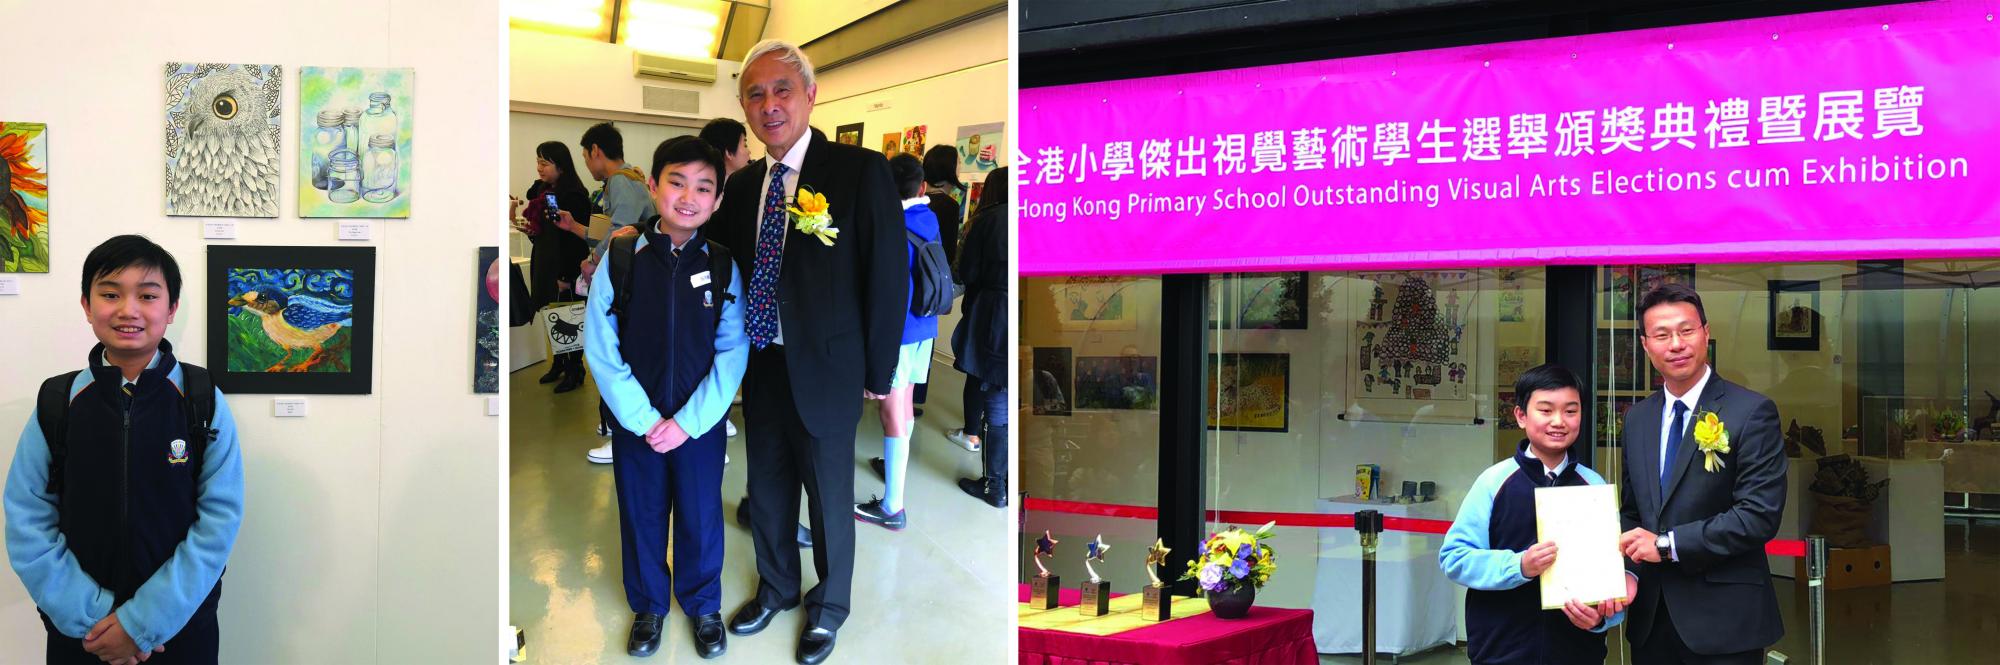 Student received Merit Award in “The 6th Hong Kong Primary School Outstanding Visual Arts Students Election” co-organized by the CEATE Teachers’ Association and the Jockey Club Ti-I College